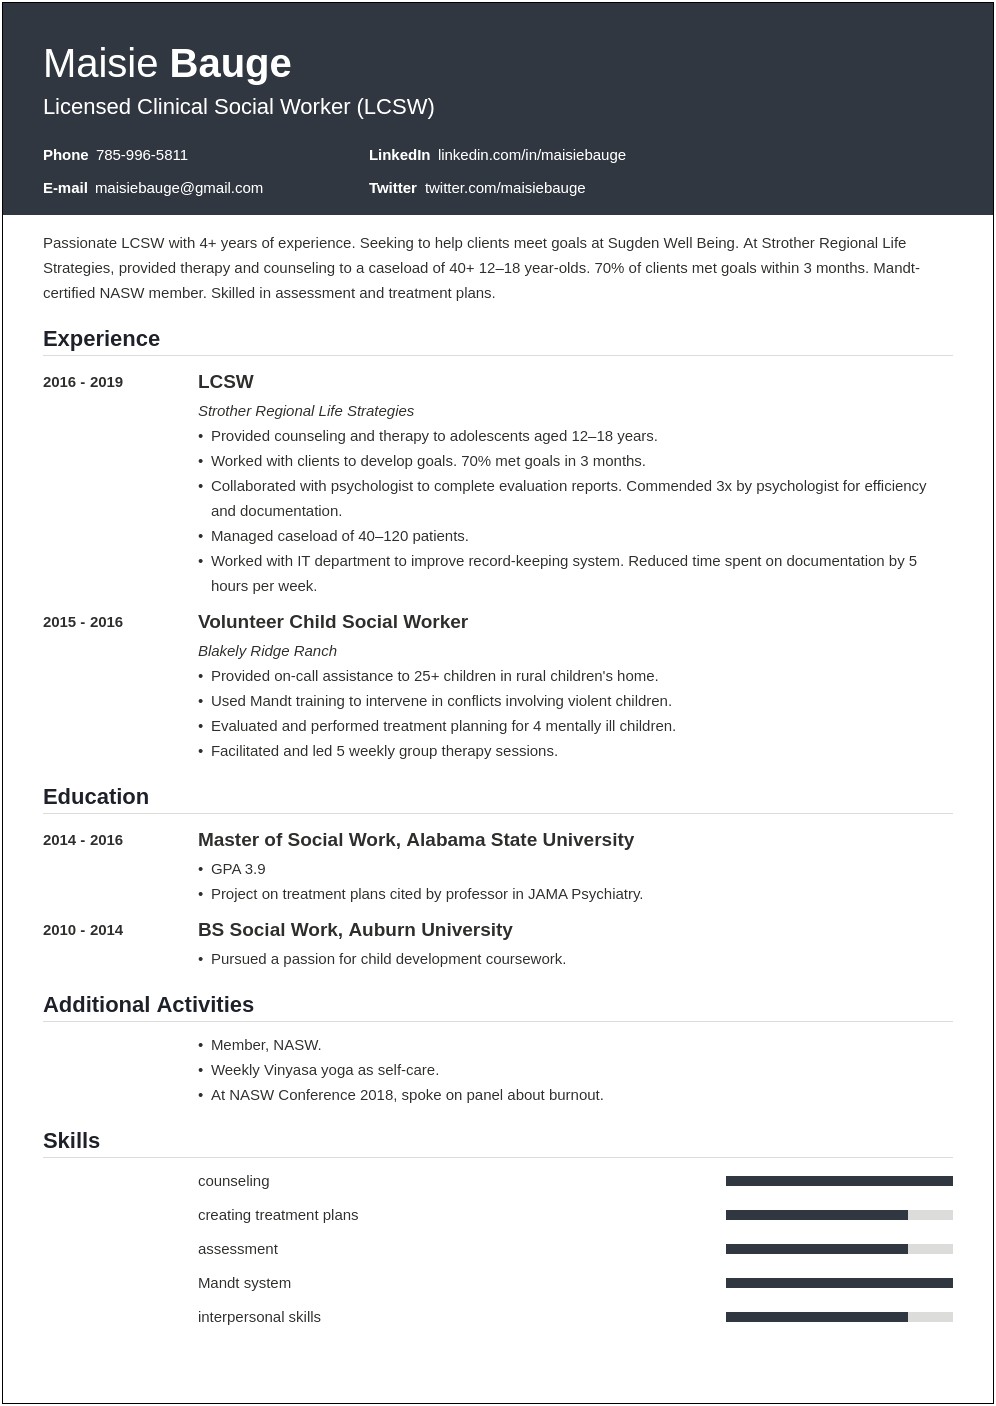 Resume Example Including Core Competancies For Social Work